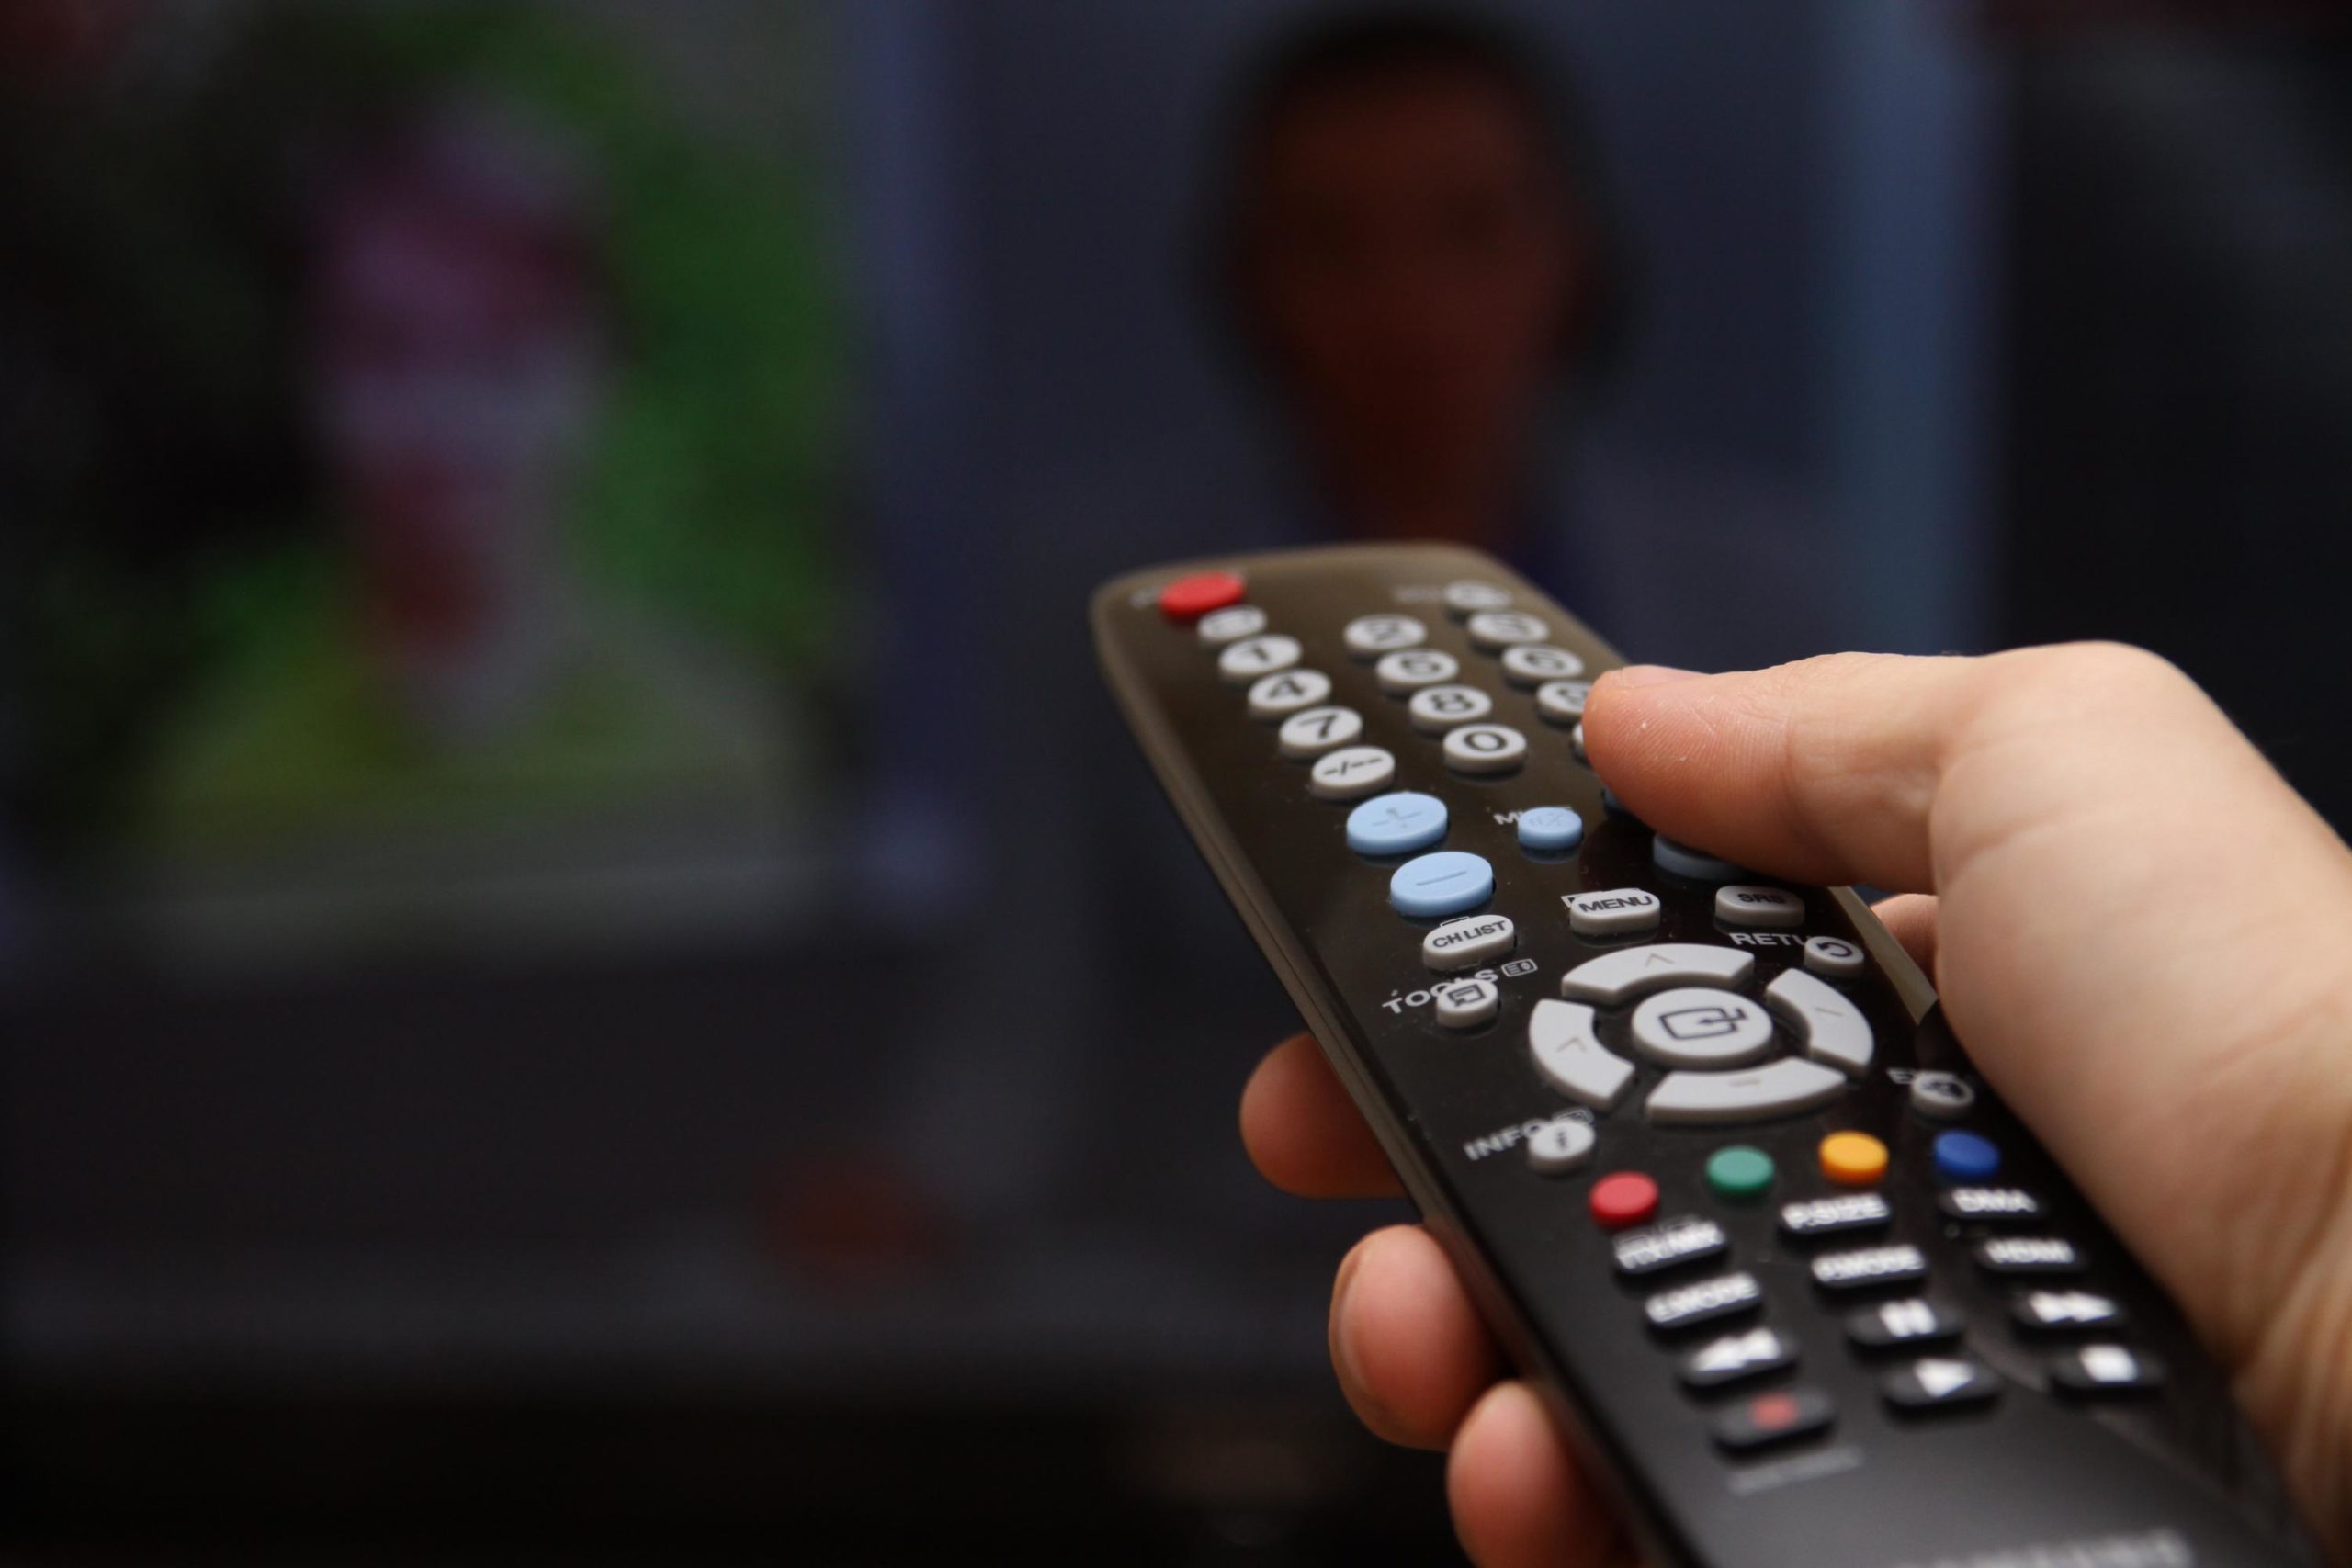 Ranking of the best universal TV remote controls in 2020